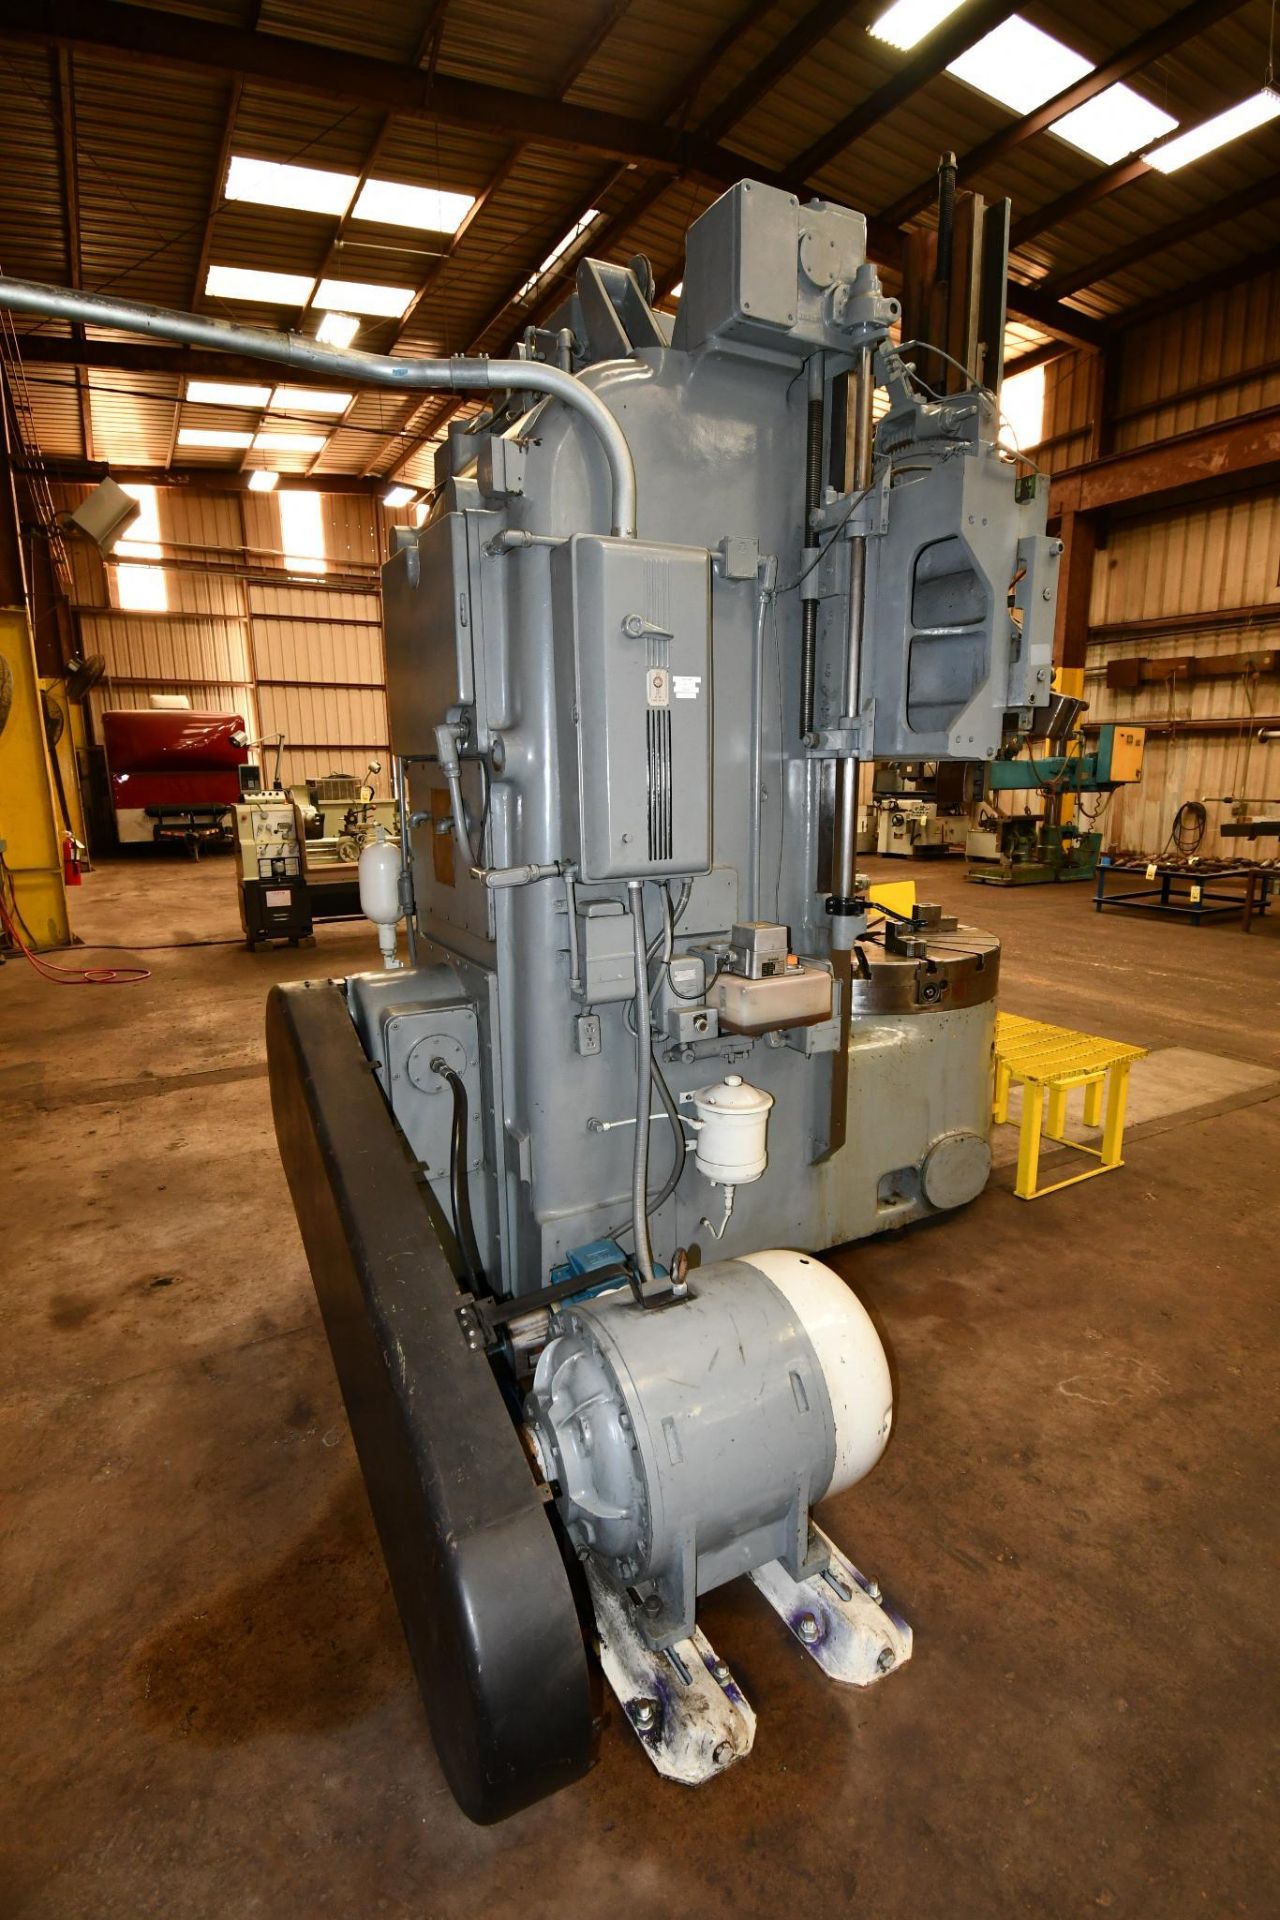 VERTICAL TURRET LATHE, BULLARD 42" CUTMASTER, 42" 4-jaw chuck w/built-in master jaws, side head, tur - Image 3 of 5